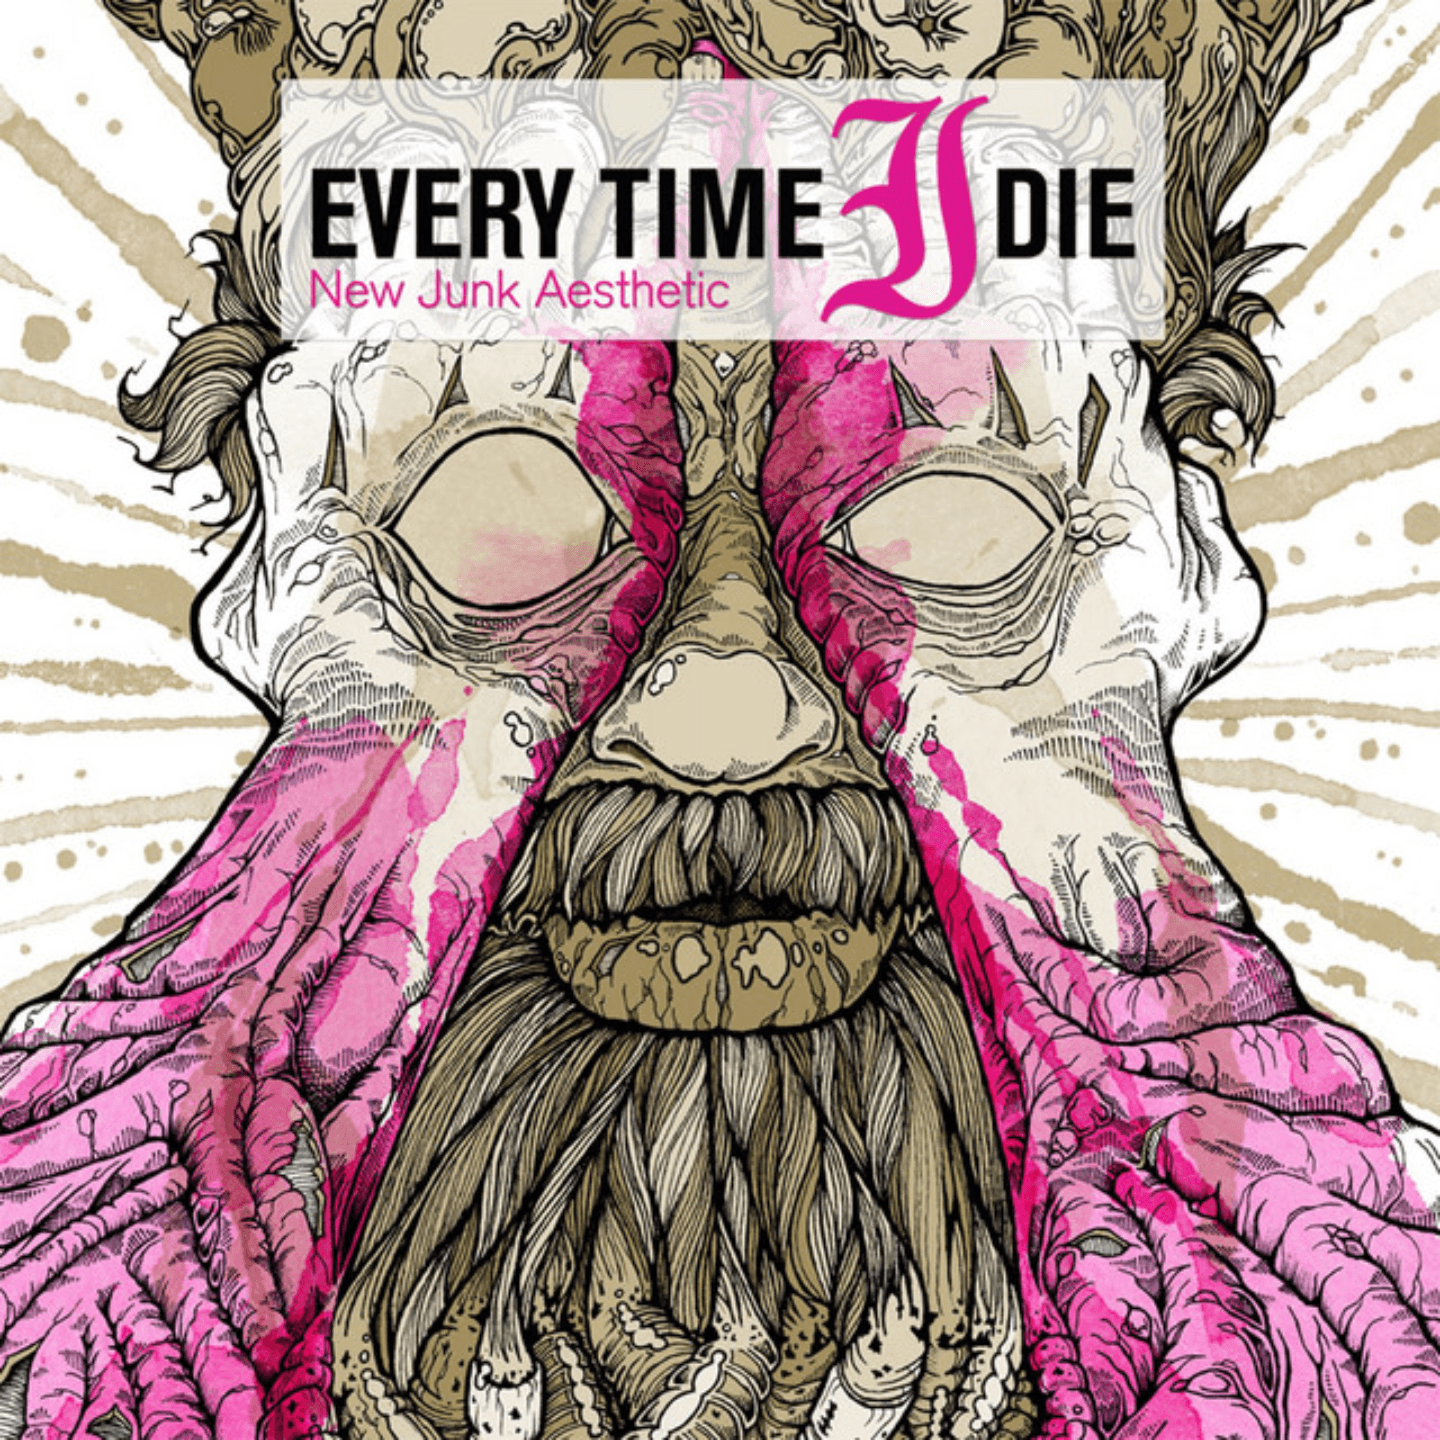 EVERY TIME I DIE - New Junk Aesthetic LP